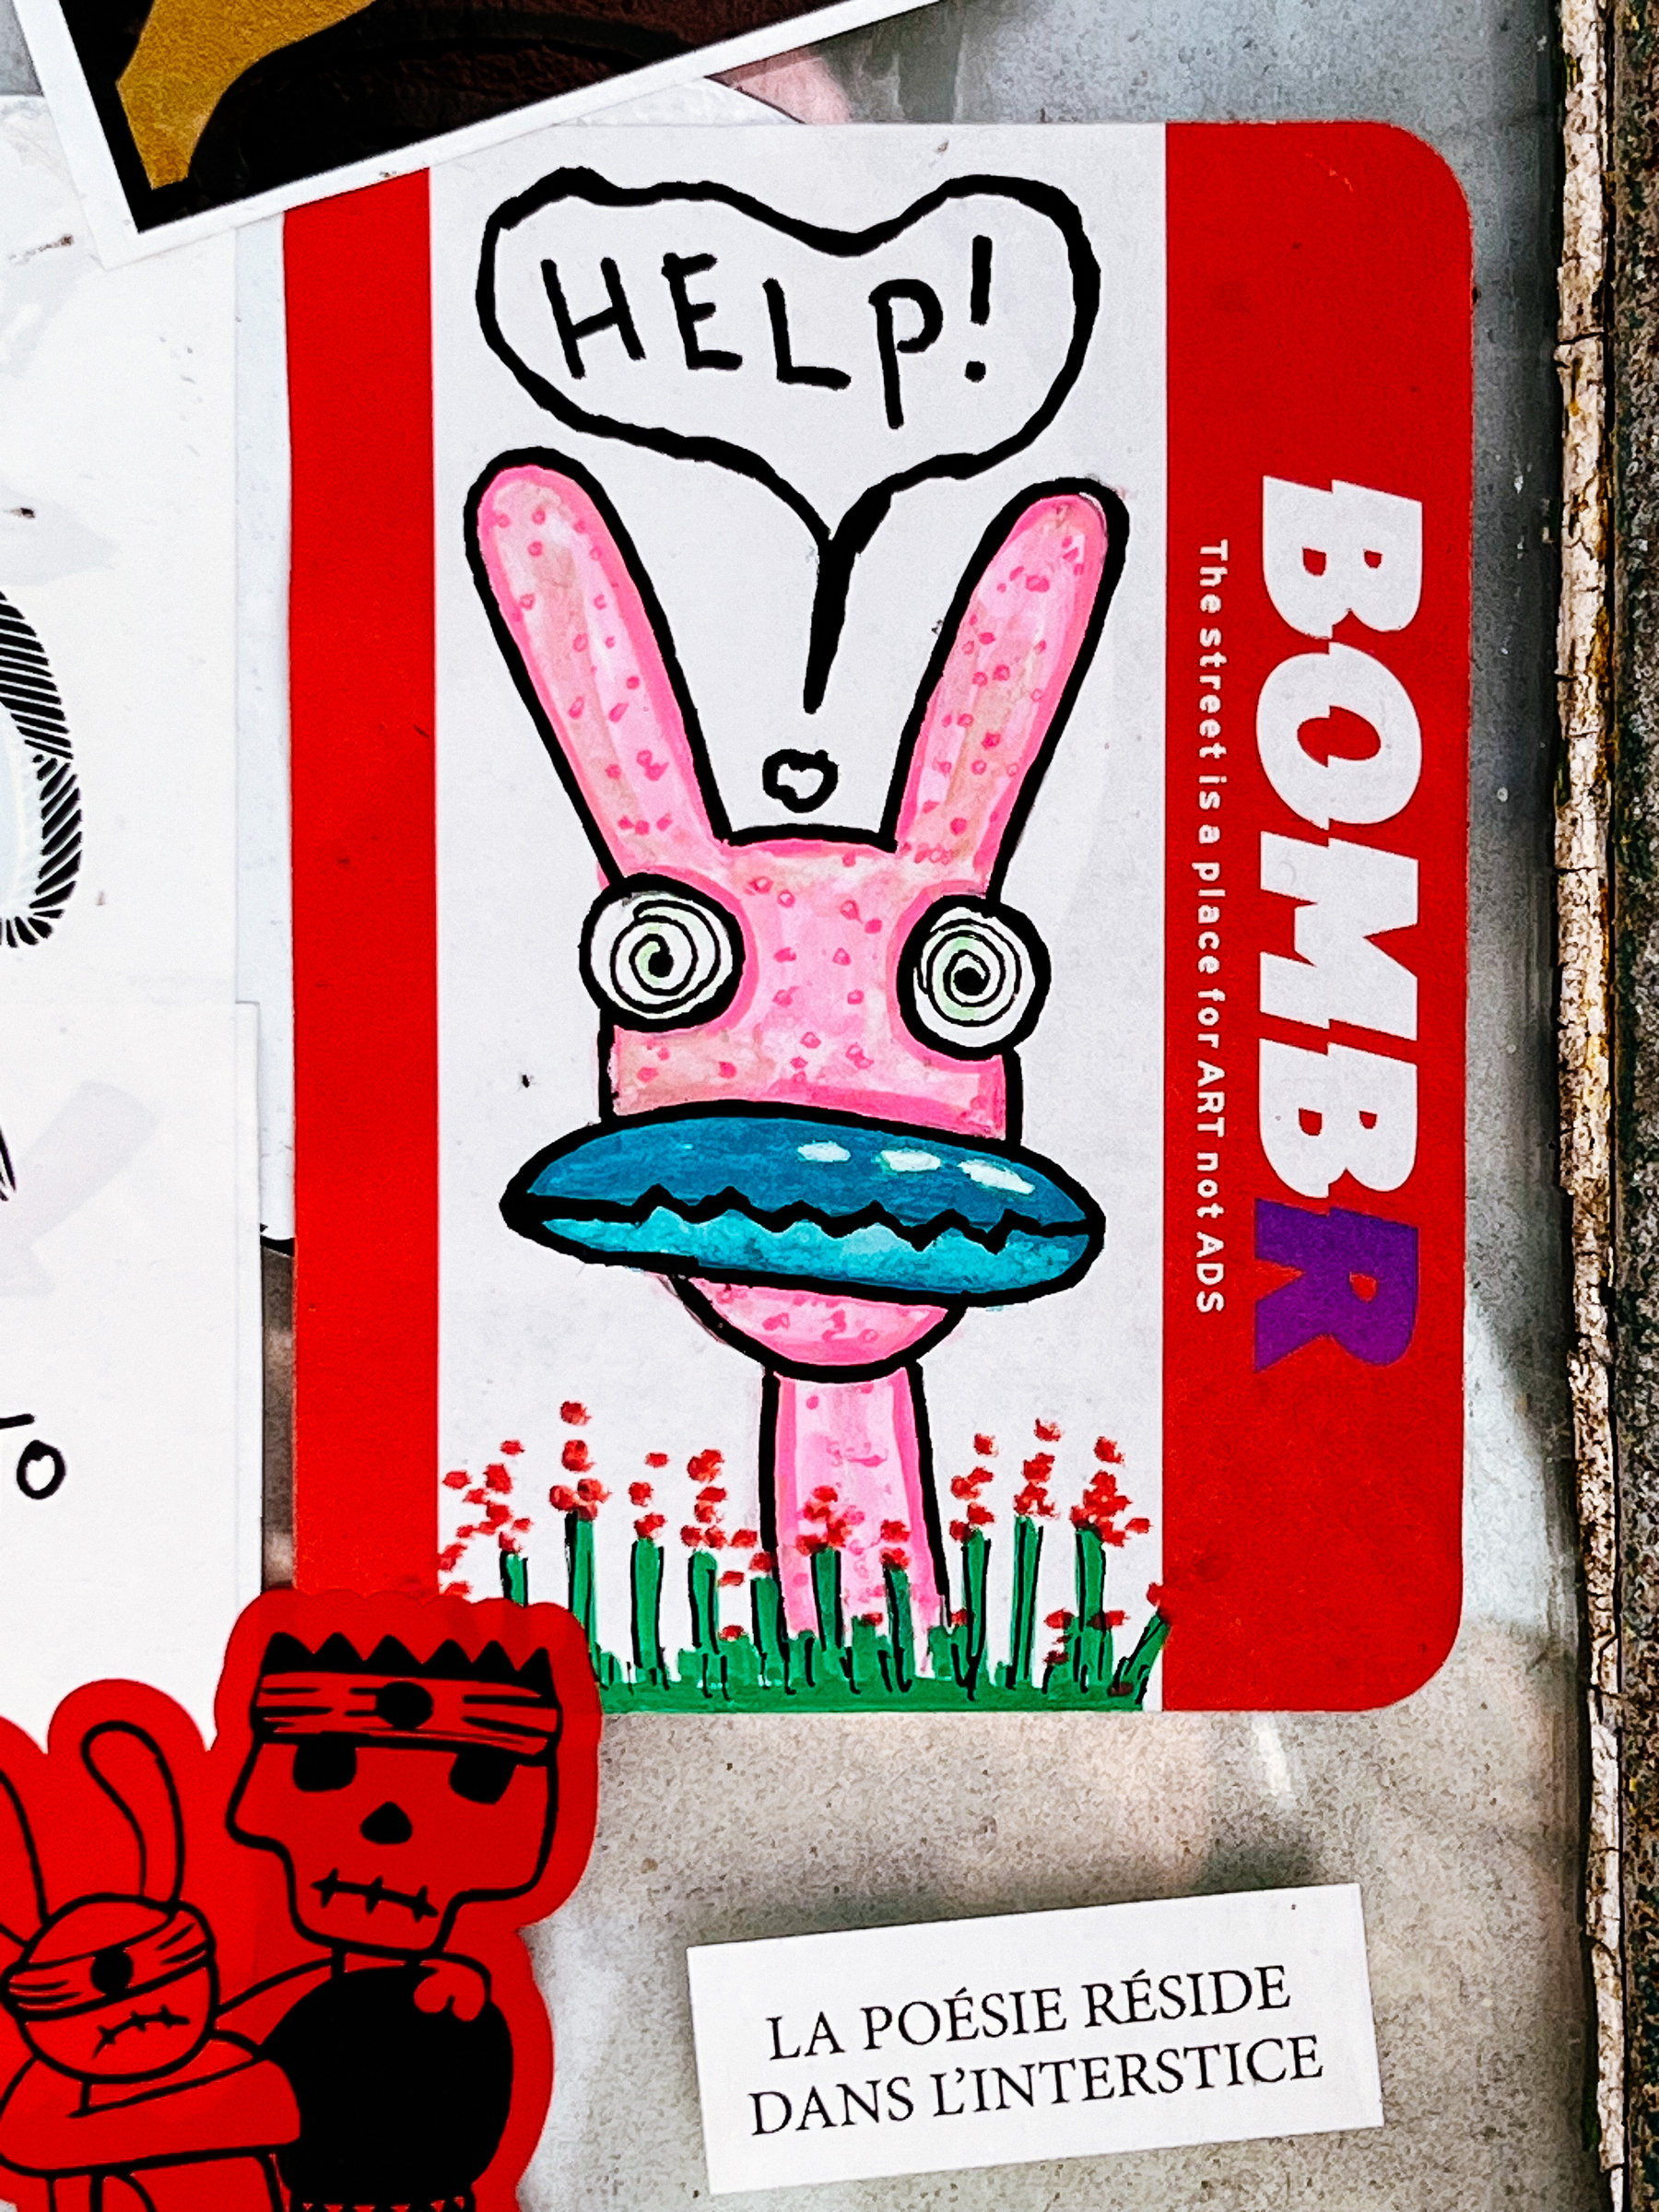 Sticker combo. A mess. There’s a cartoon creature, sorta like a rabbit, a pink one, with crazy hypnotized eyes, a very large blue mouth, and a cry for “HELP!”. That sticker has “BOMBRThe street is a place for ART not ADS.” written on it. Below you’ll find a simple black text on white background, with “LA POÉSIE RÉSIDE DANS L’INTERSTICE”. Still place for an old friend, the skull faced girl with the eye patch wearing bunny.